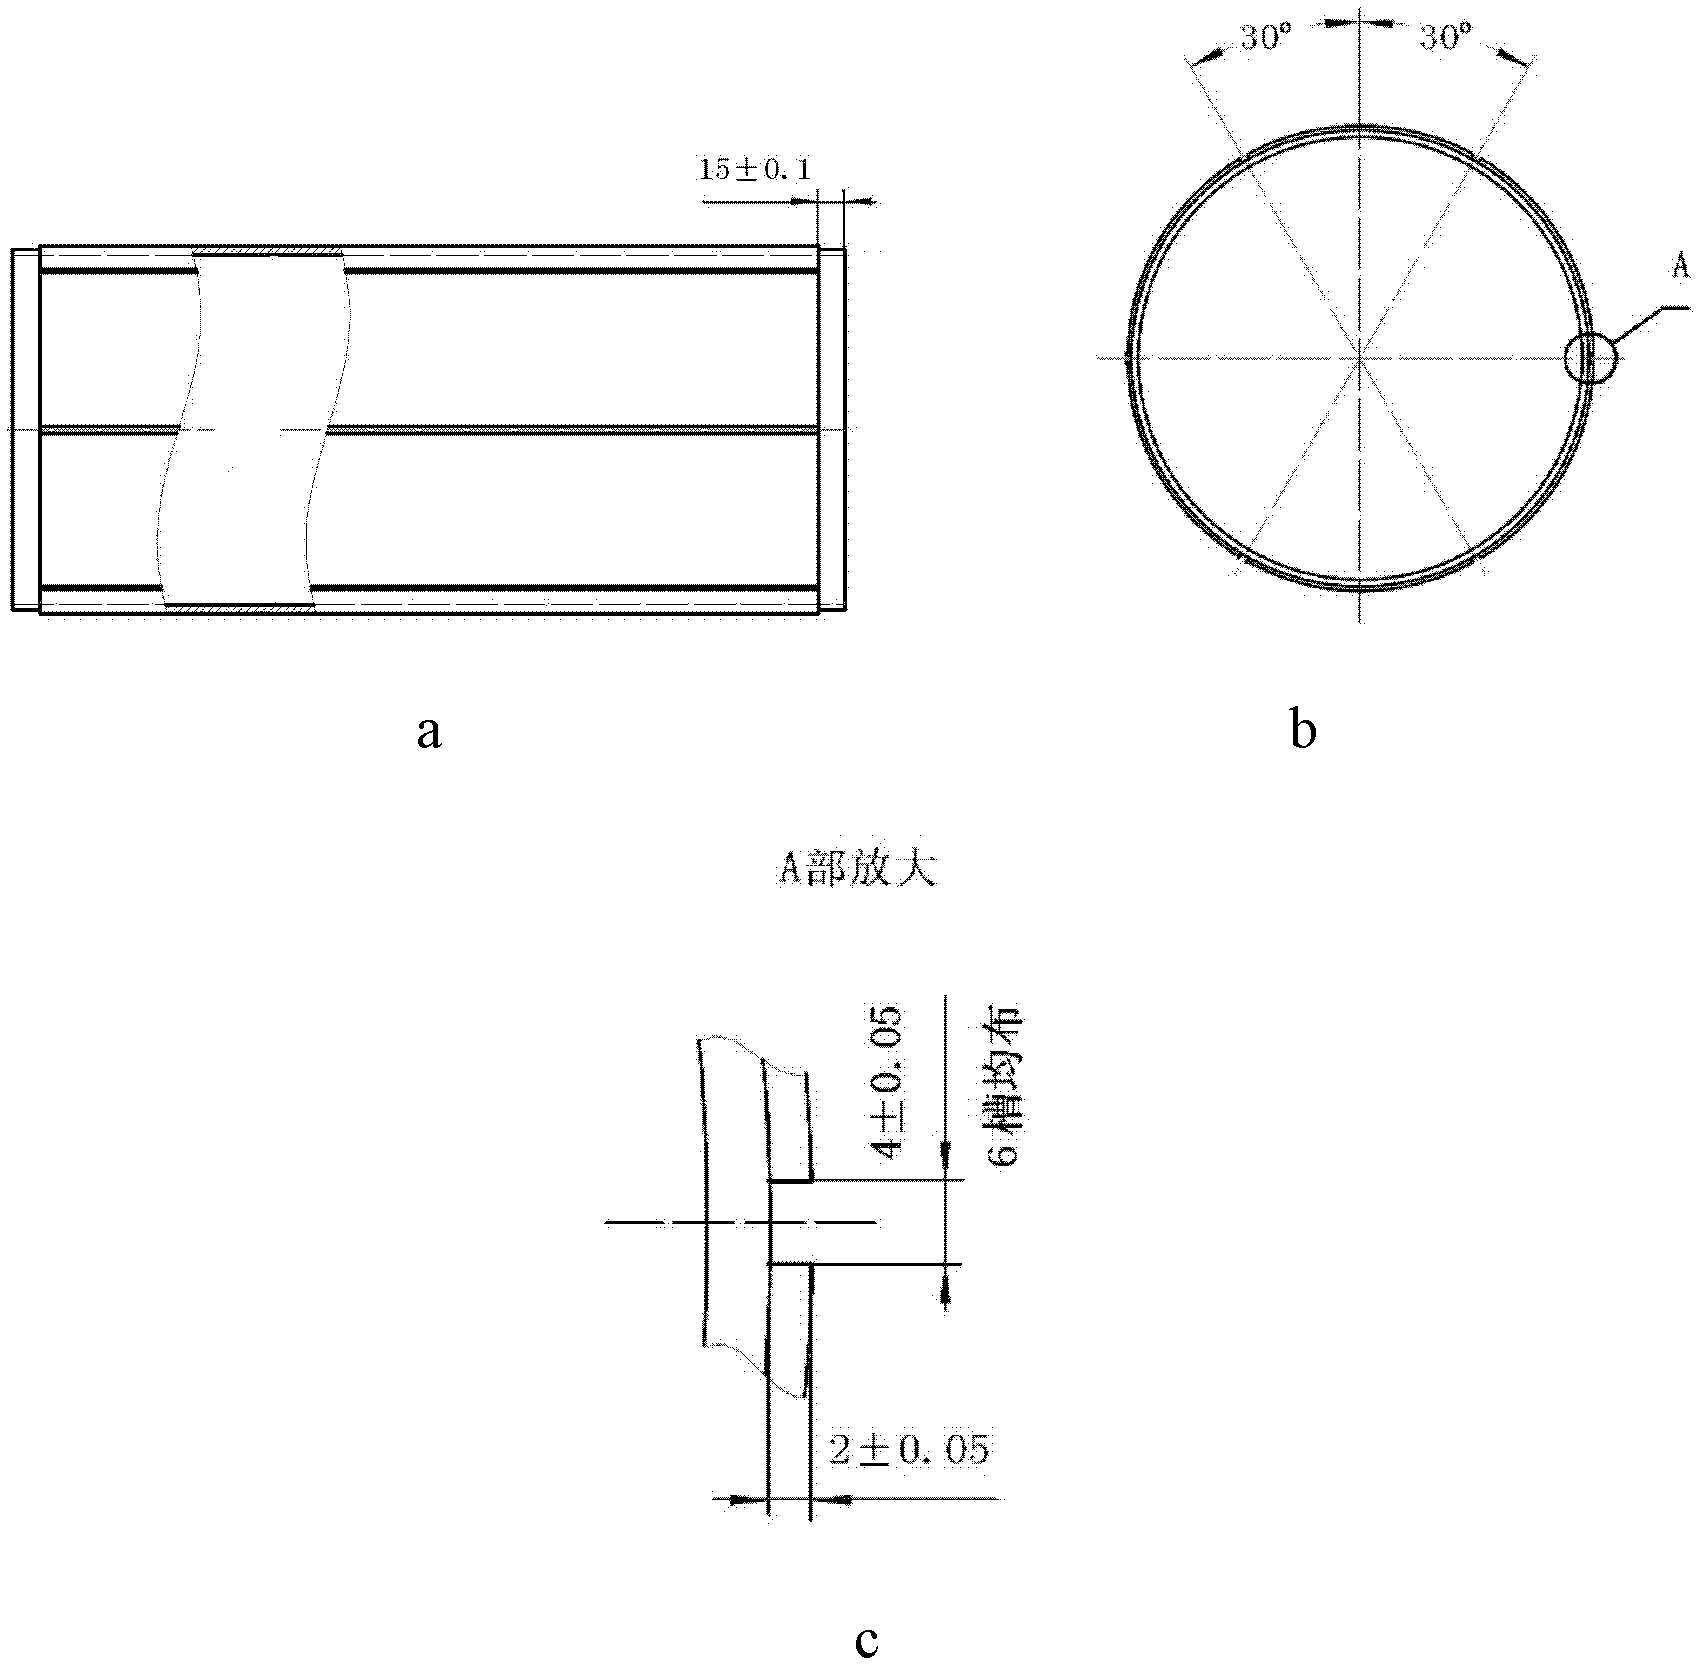 Framework applied to superconductive solenoid magnet